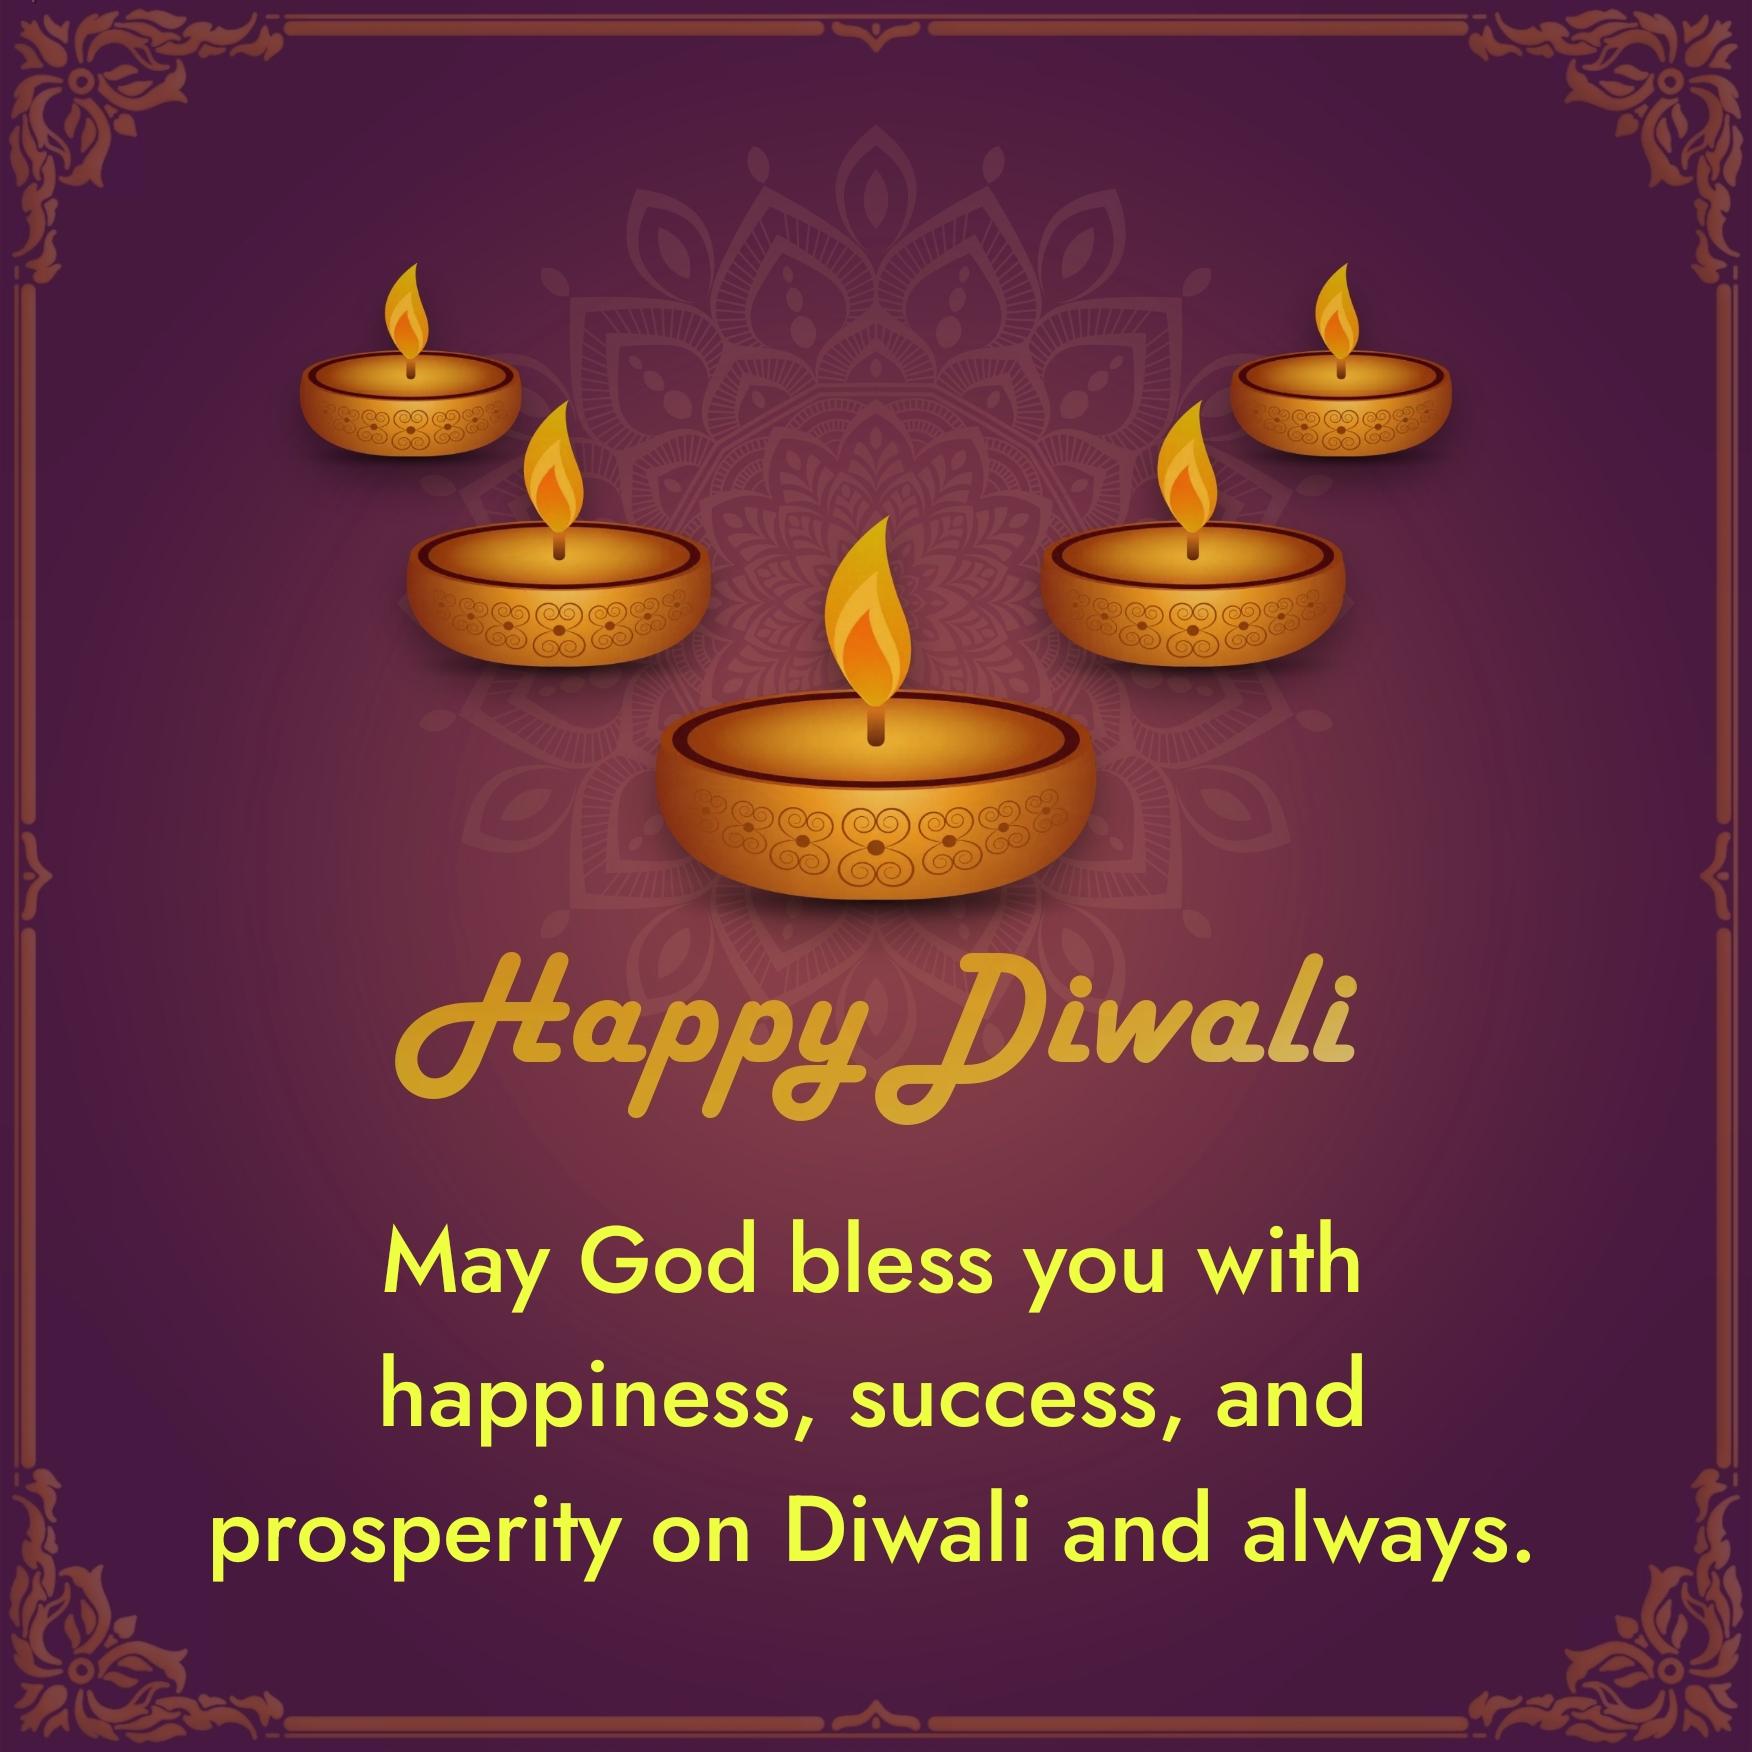 May God bless you with happiness success and prosperity